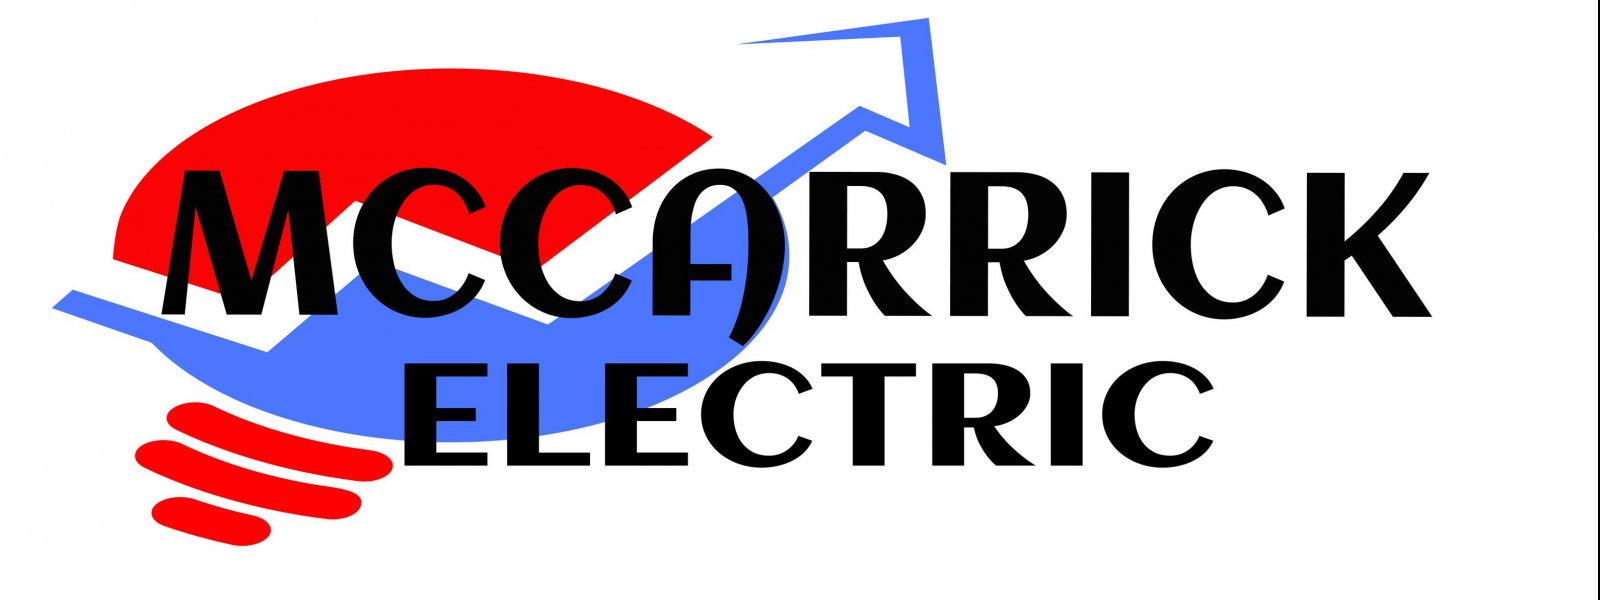 MCCARRICK ELECTRIC | 10843 E 96th Pl, Commerce City, CO 80022, United States | Phone: (720) 434-3960